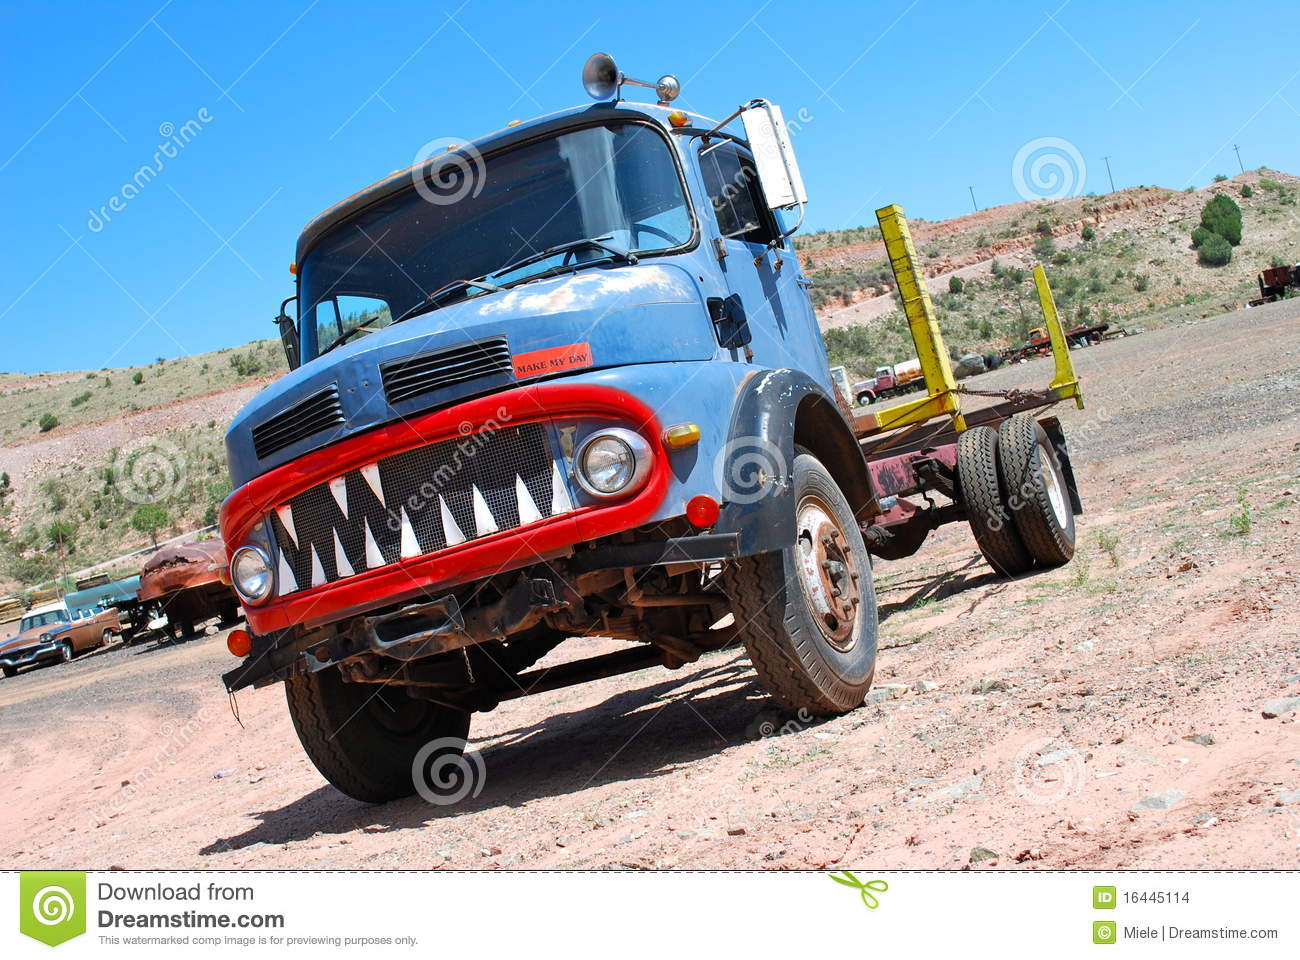 Nice Truck Stock Images   Image  16445114